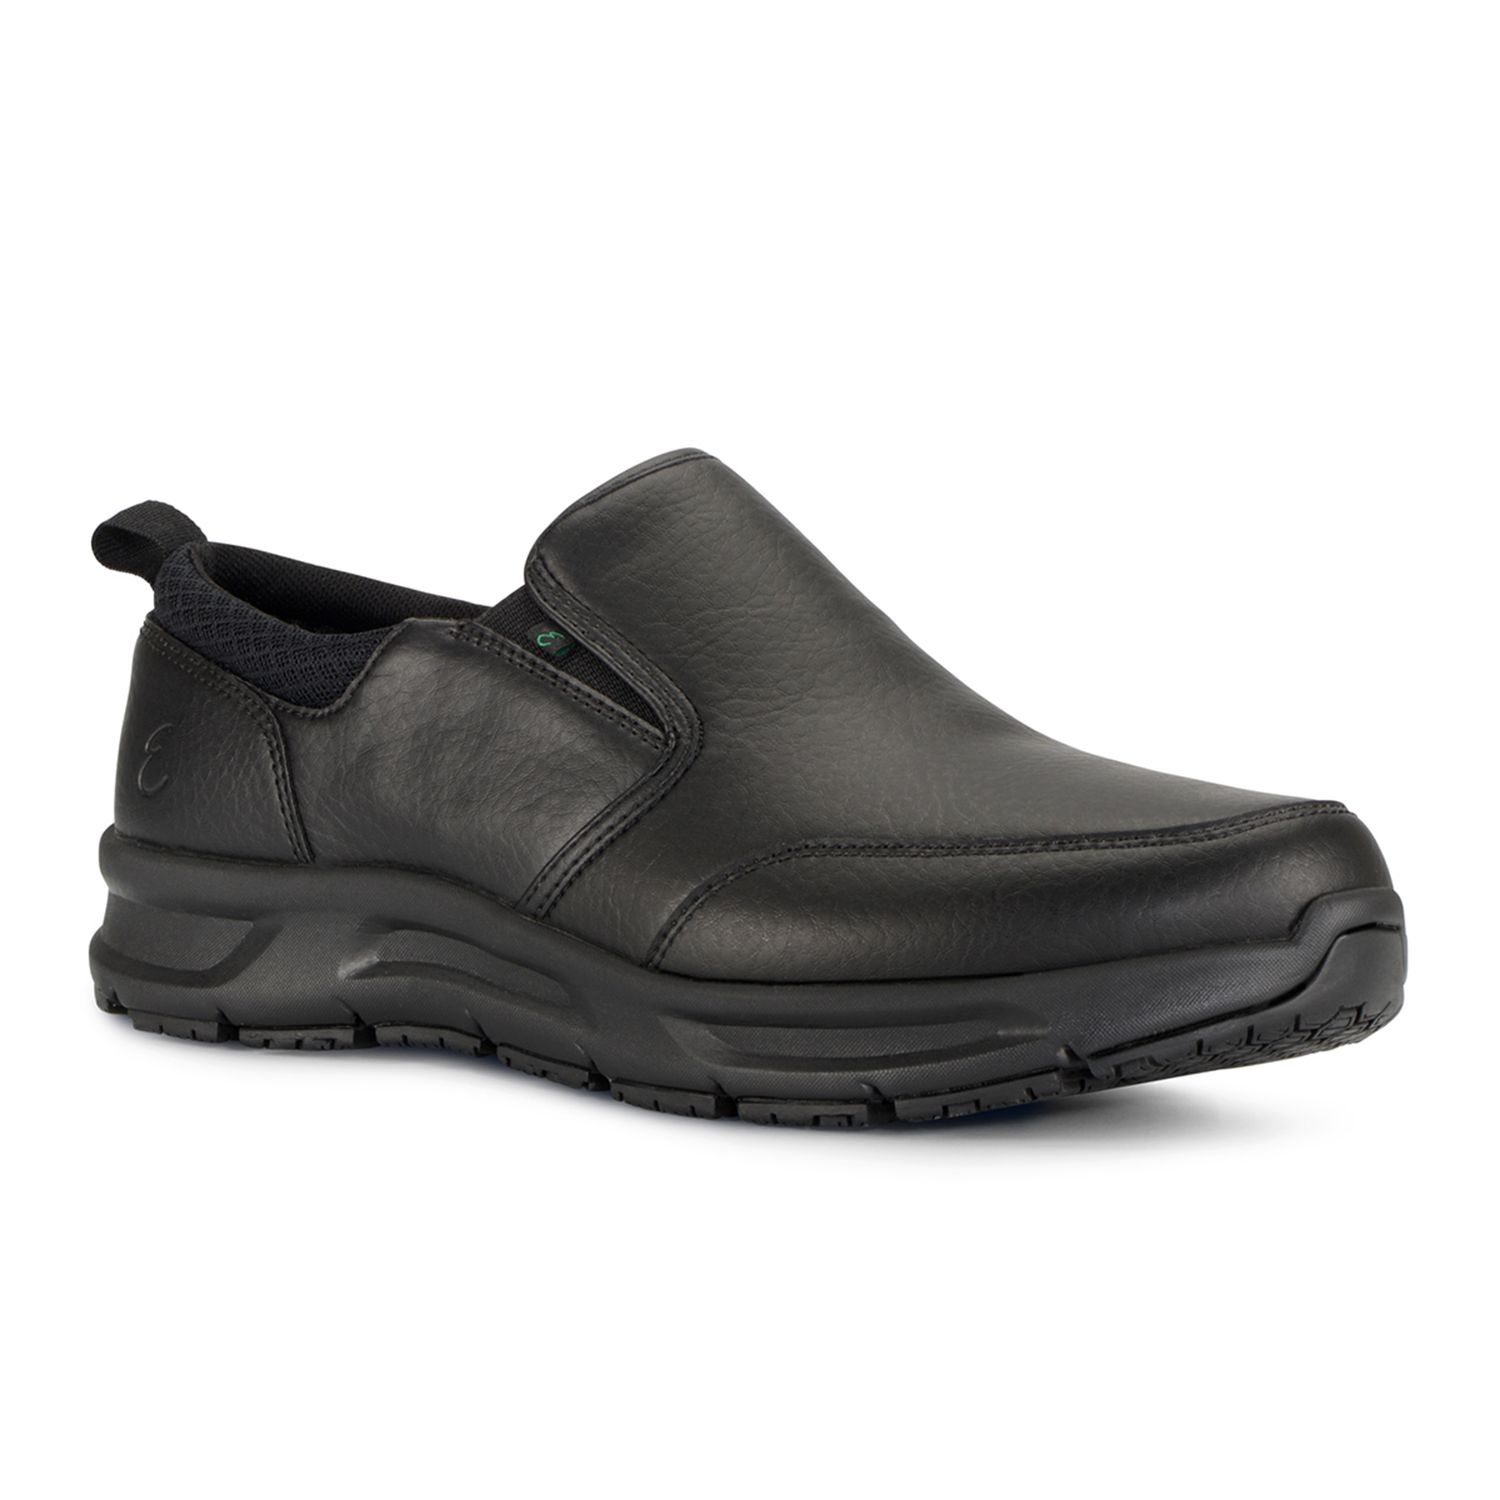 slip and water resistant shoes